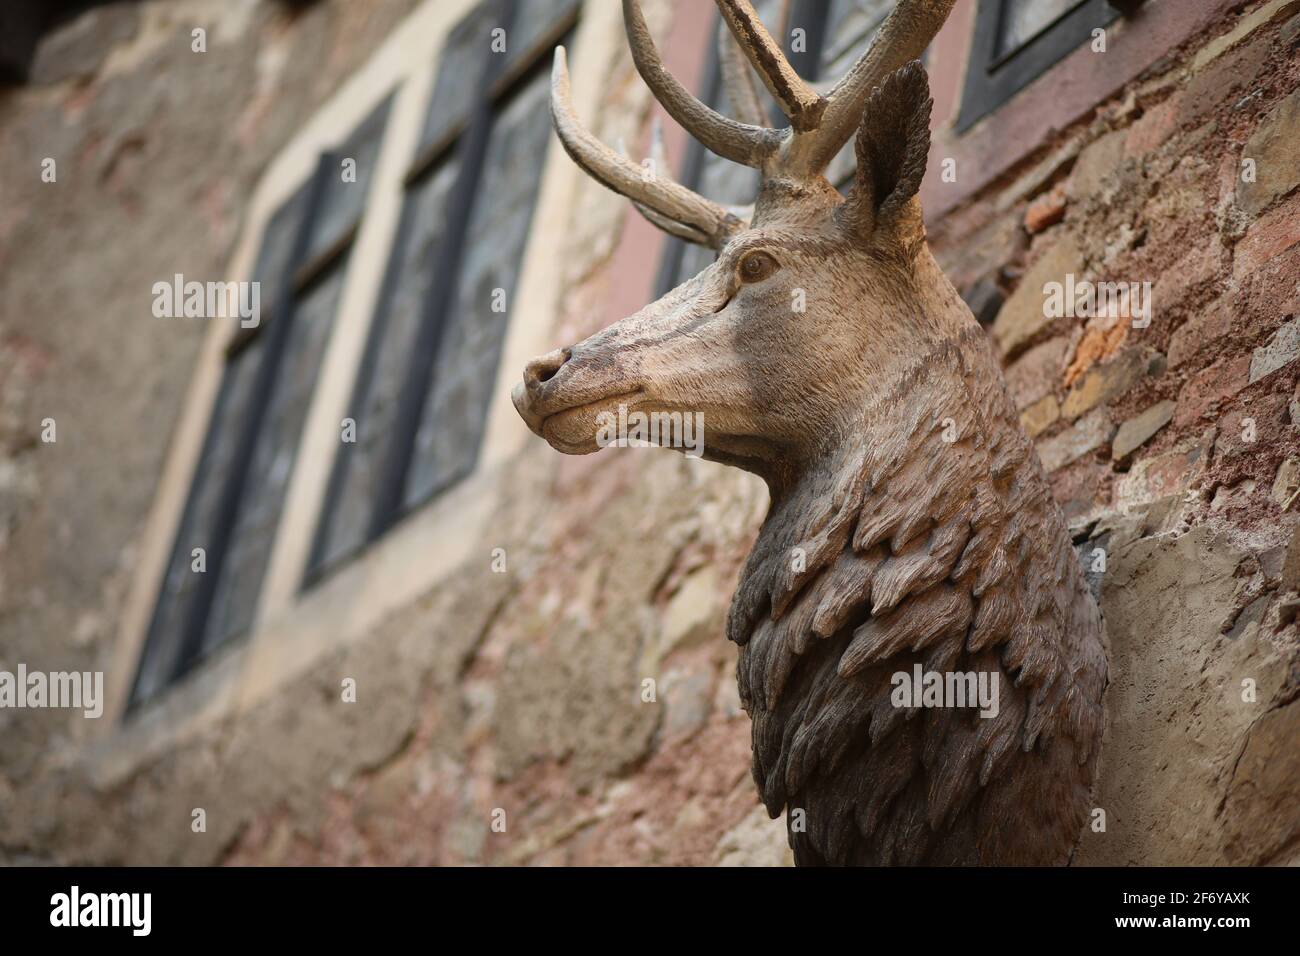 Pansfelde, Germany. 03rd Apr, 2021. A stag's head is emblazoned above the entrance to the inner courtyard. Falkenstein Castle in the southern Harz region was reopened to visitors for the first time after a long break due to the Corona pandemic. After booking by phone, visitors can tour the castle grounds as well as experience a falconry demonstration. The castle is situated above the Selketal. The fortified complex was built at the beginning of the 12th century and passed as a fiefdom to the noble Asseburg family in the 15th century. Credit: Matthias Bein/dpa-Zentralbild/dpa/Alamy Live News Stock Photo